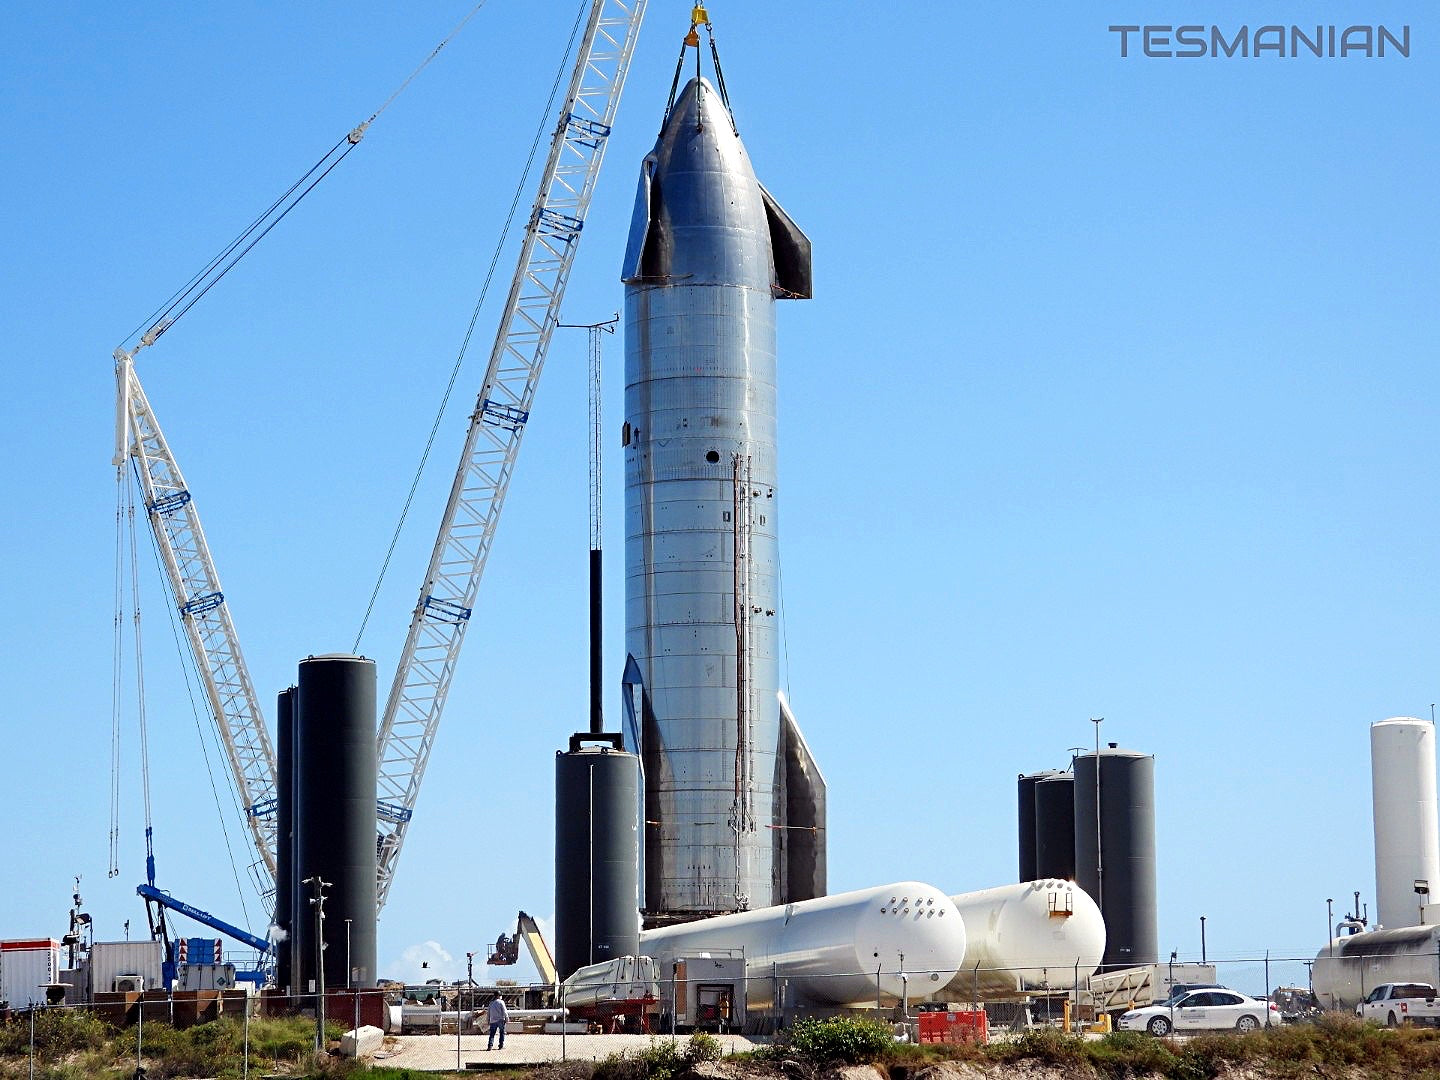 SpaceX assembles Starship SN8 at the South Texas Launch Facility [photos]